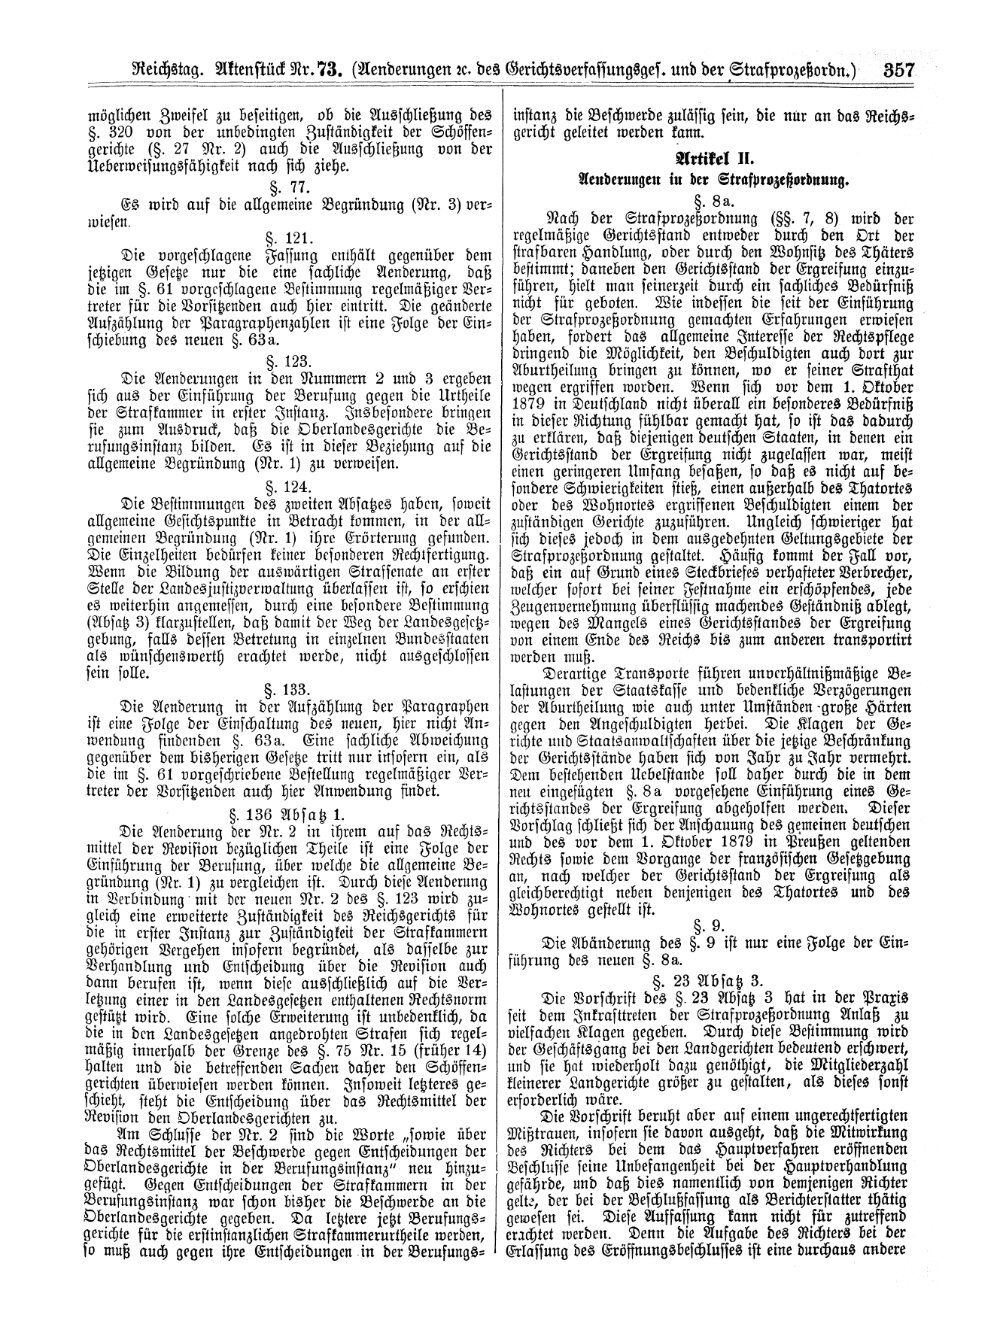 Scan of page 357